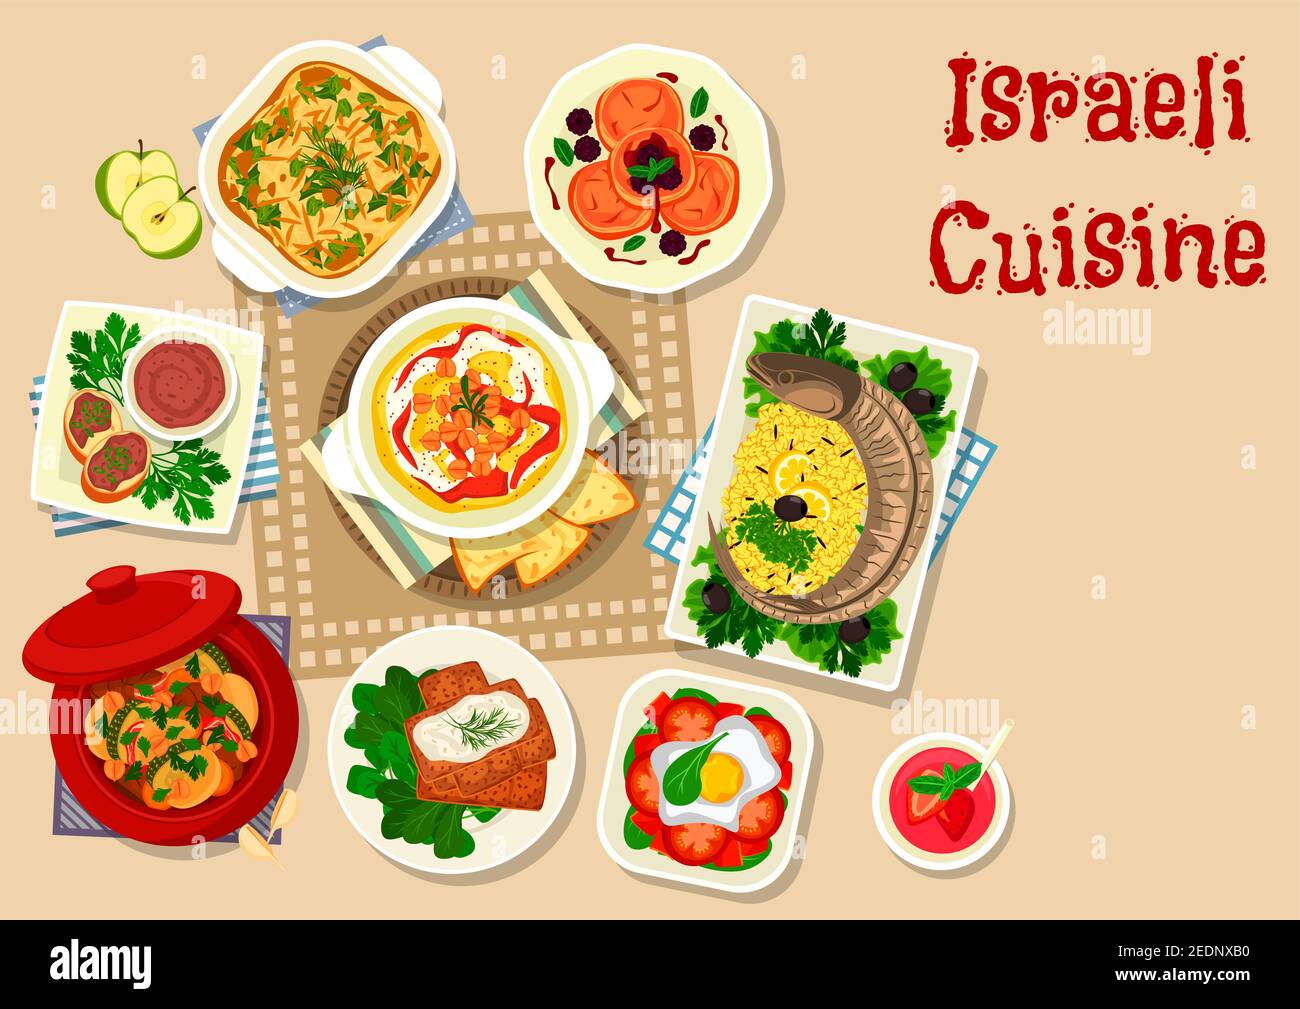 Israeli cuisine stuffed fish icon served with vegetable lamb stew, herring forshmak on flatbread, chickpea hummus, beef liver pate, fried egg with veg Stock Vector